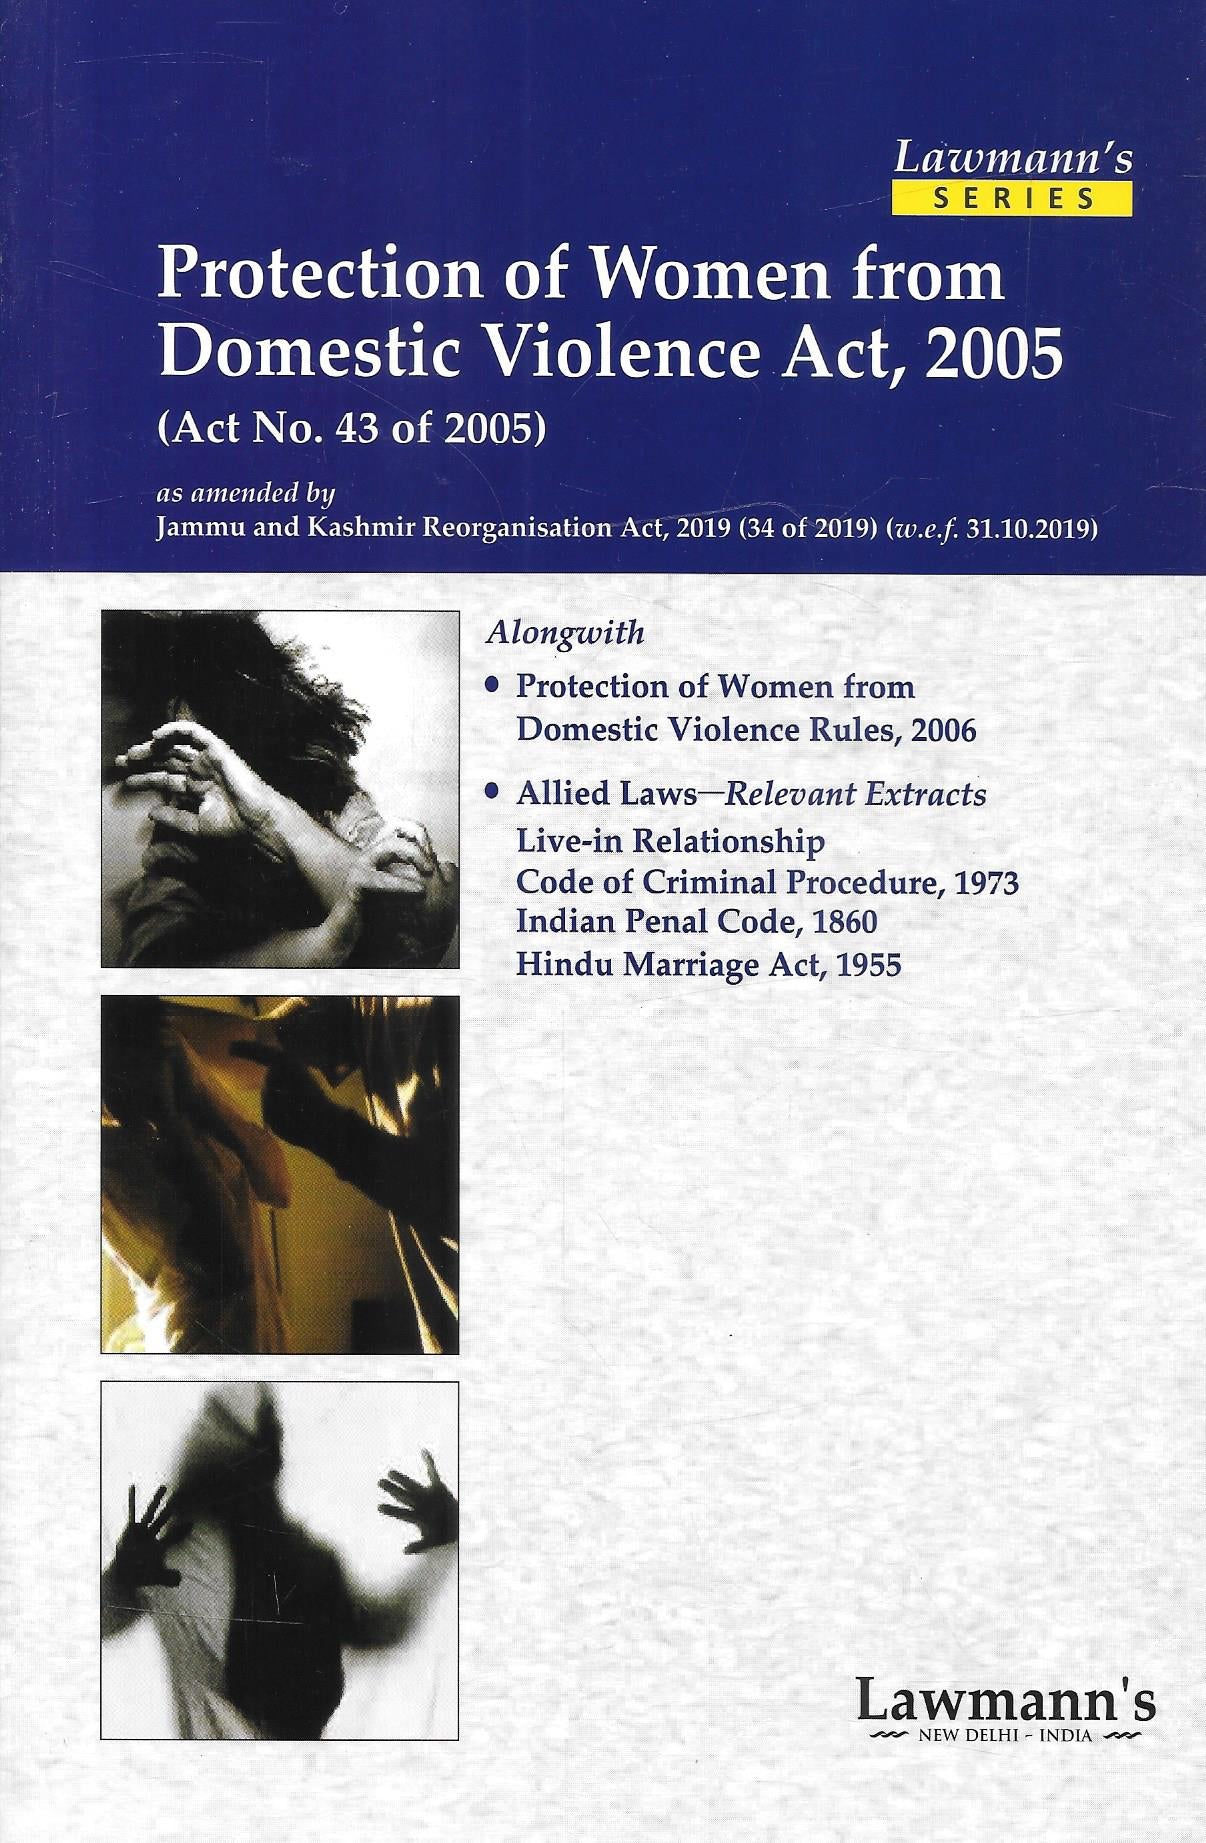 Protection of Women from Domestic Violence Act, 2005